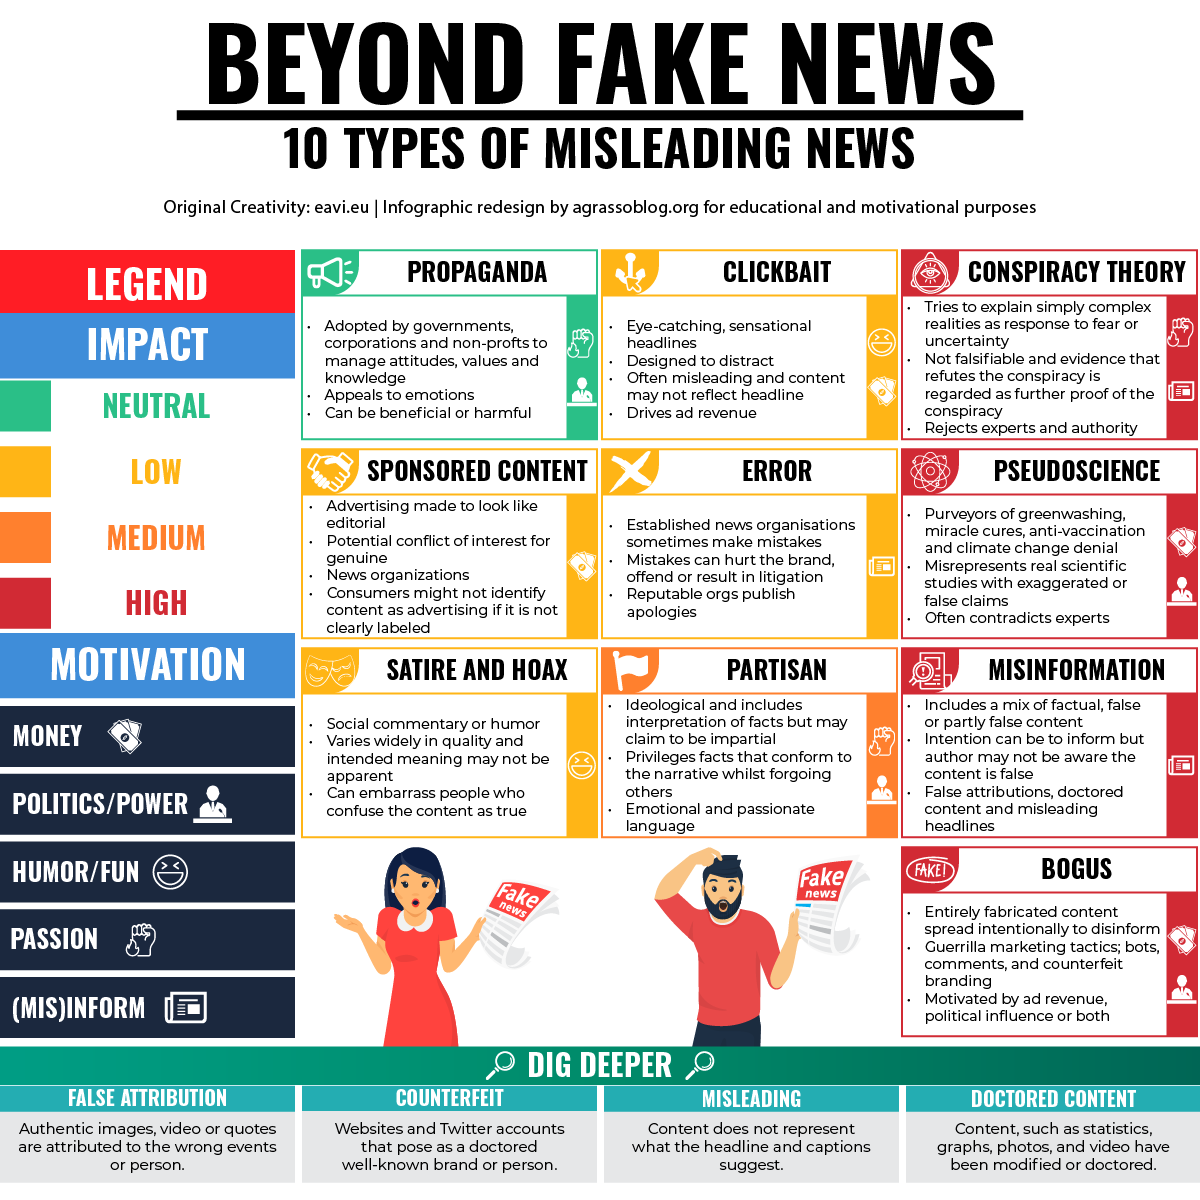 🆘 Fake #News is a Rampant Plague!

Hats off to @LindaGrasso for this great analysis! #Politics & #money are often the cause.  Sometimes it's #health claims or #business or just guile. @RosyCoaching @bimedotcom @BetaMoroney @mick_levy @chr_paillard #Ethics #information #media